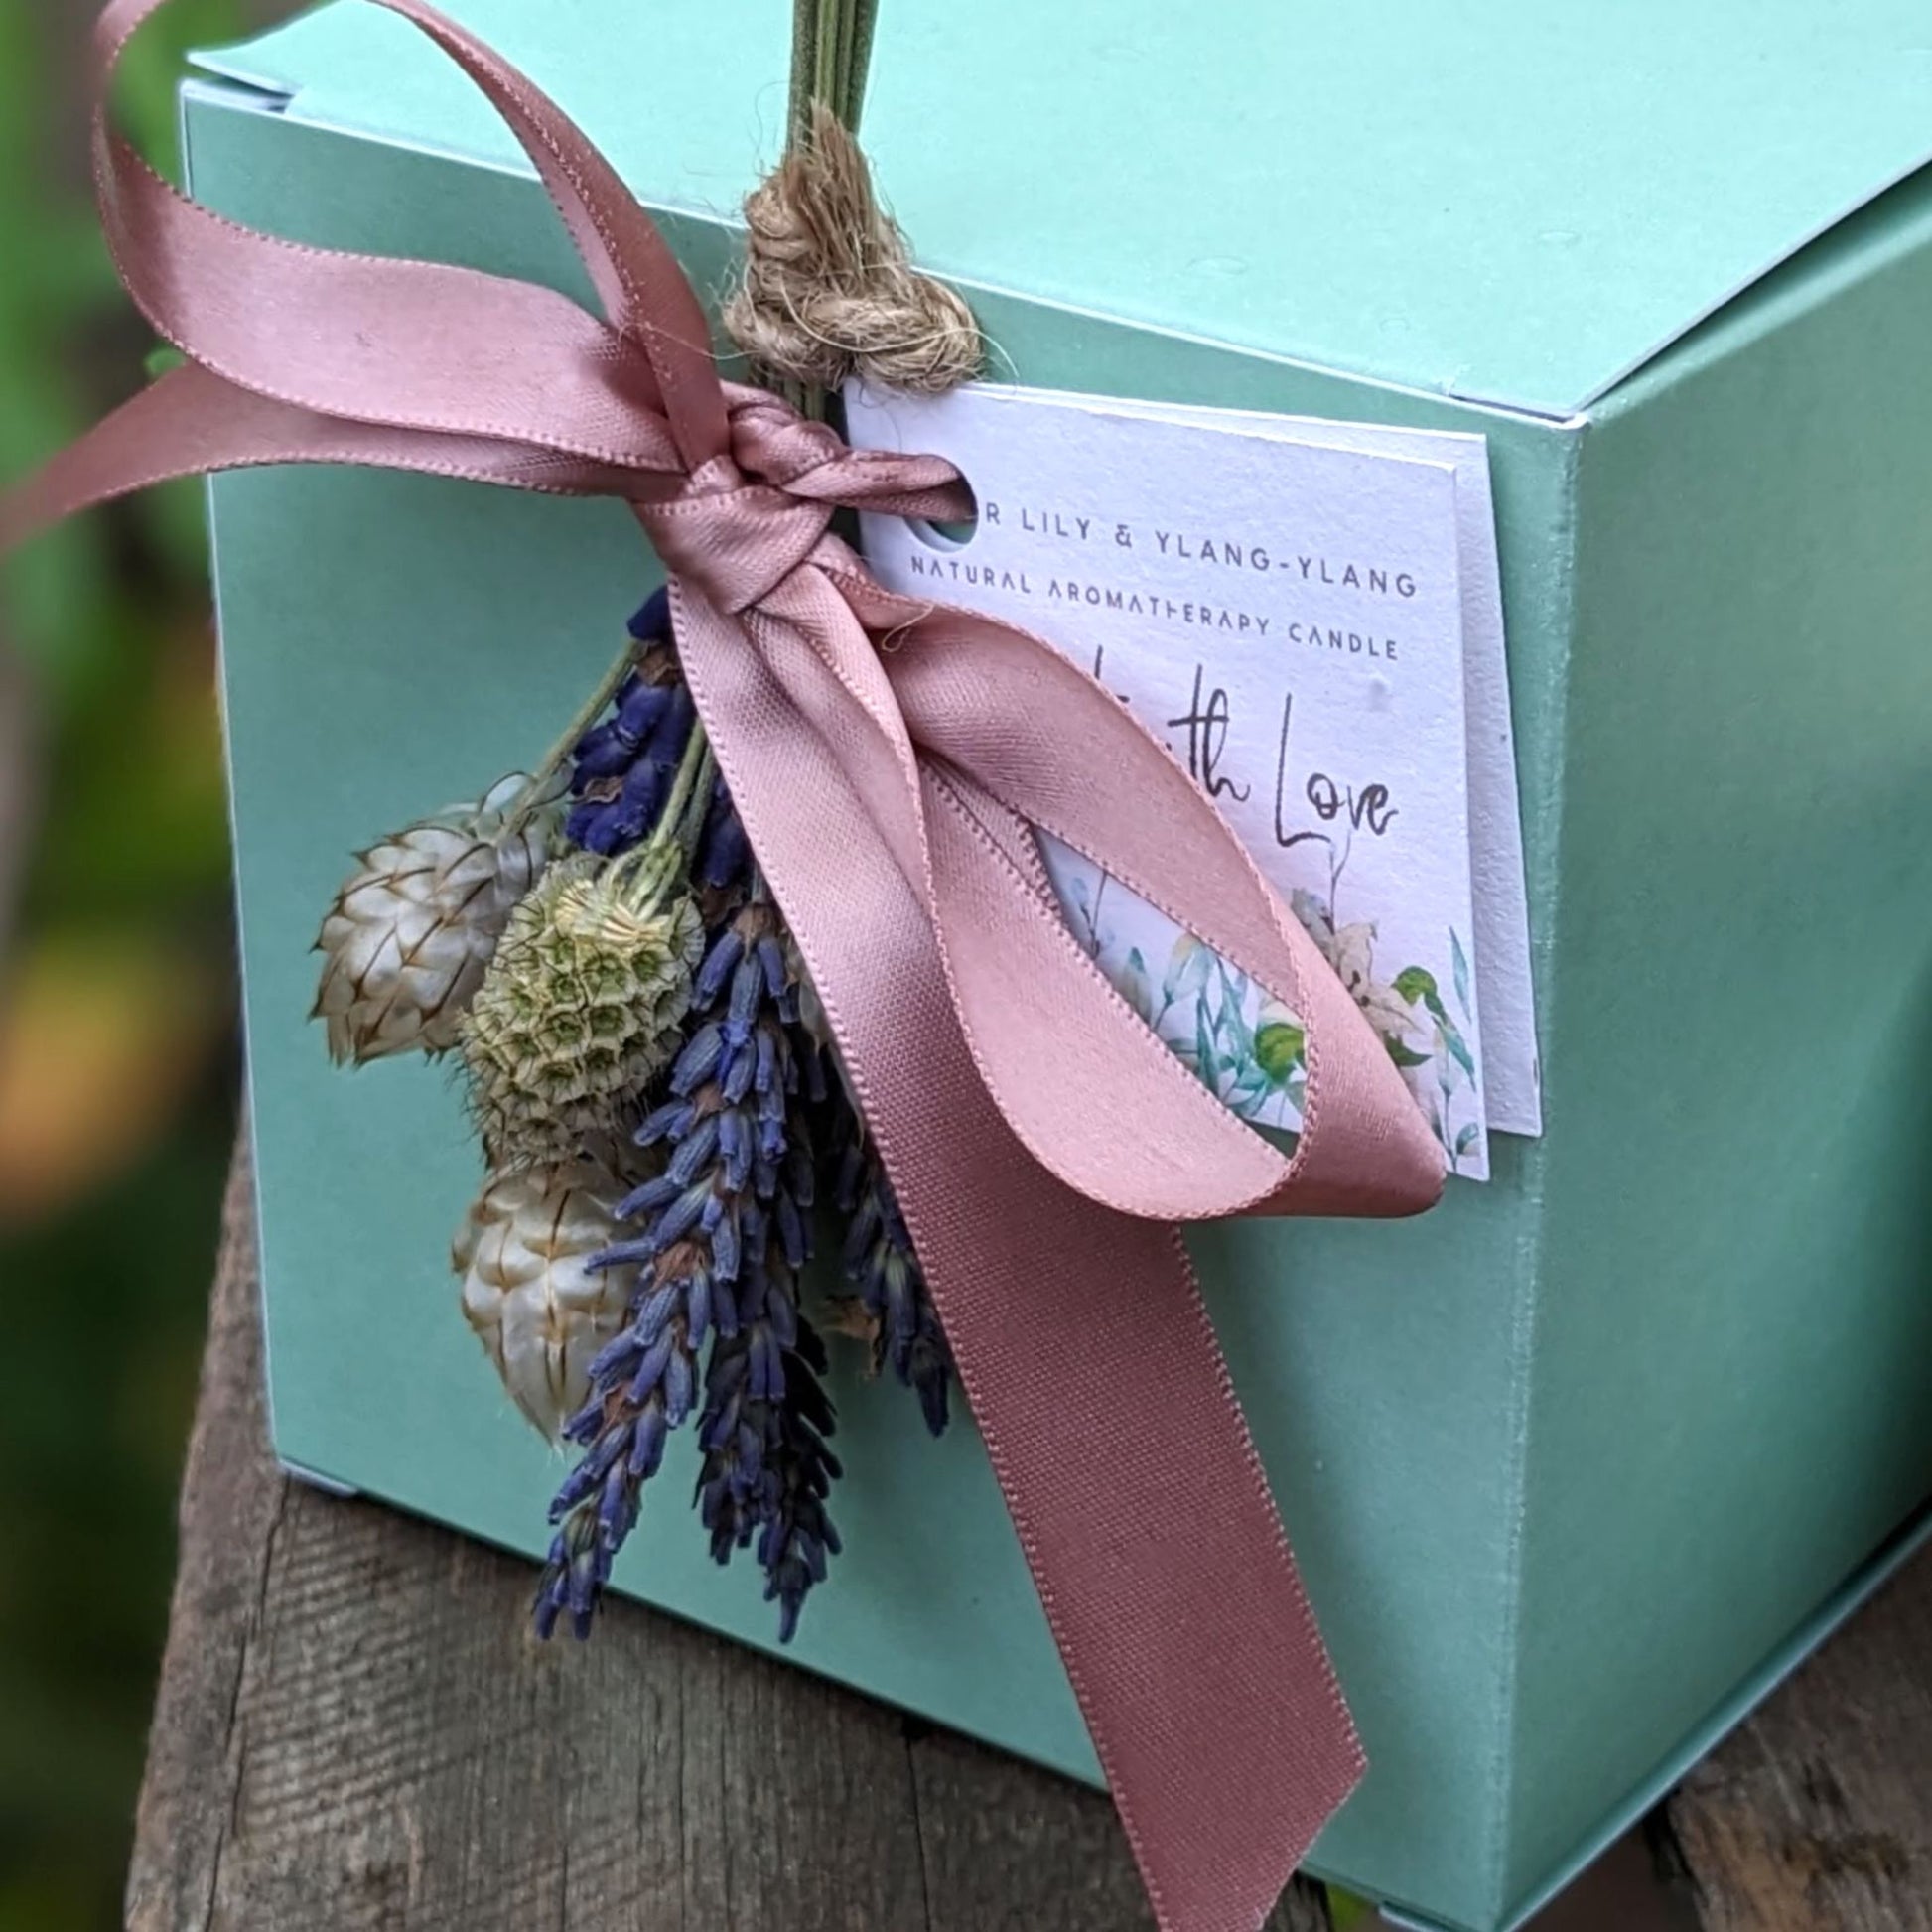 Green gift box for an aromatherapy candle